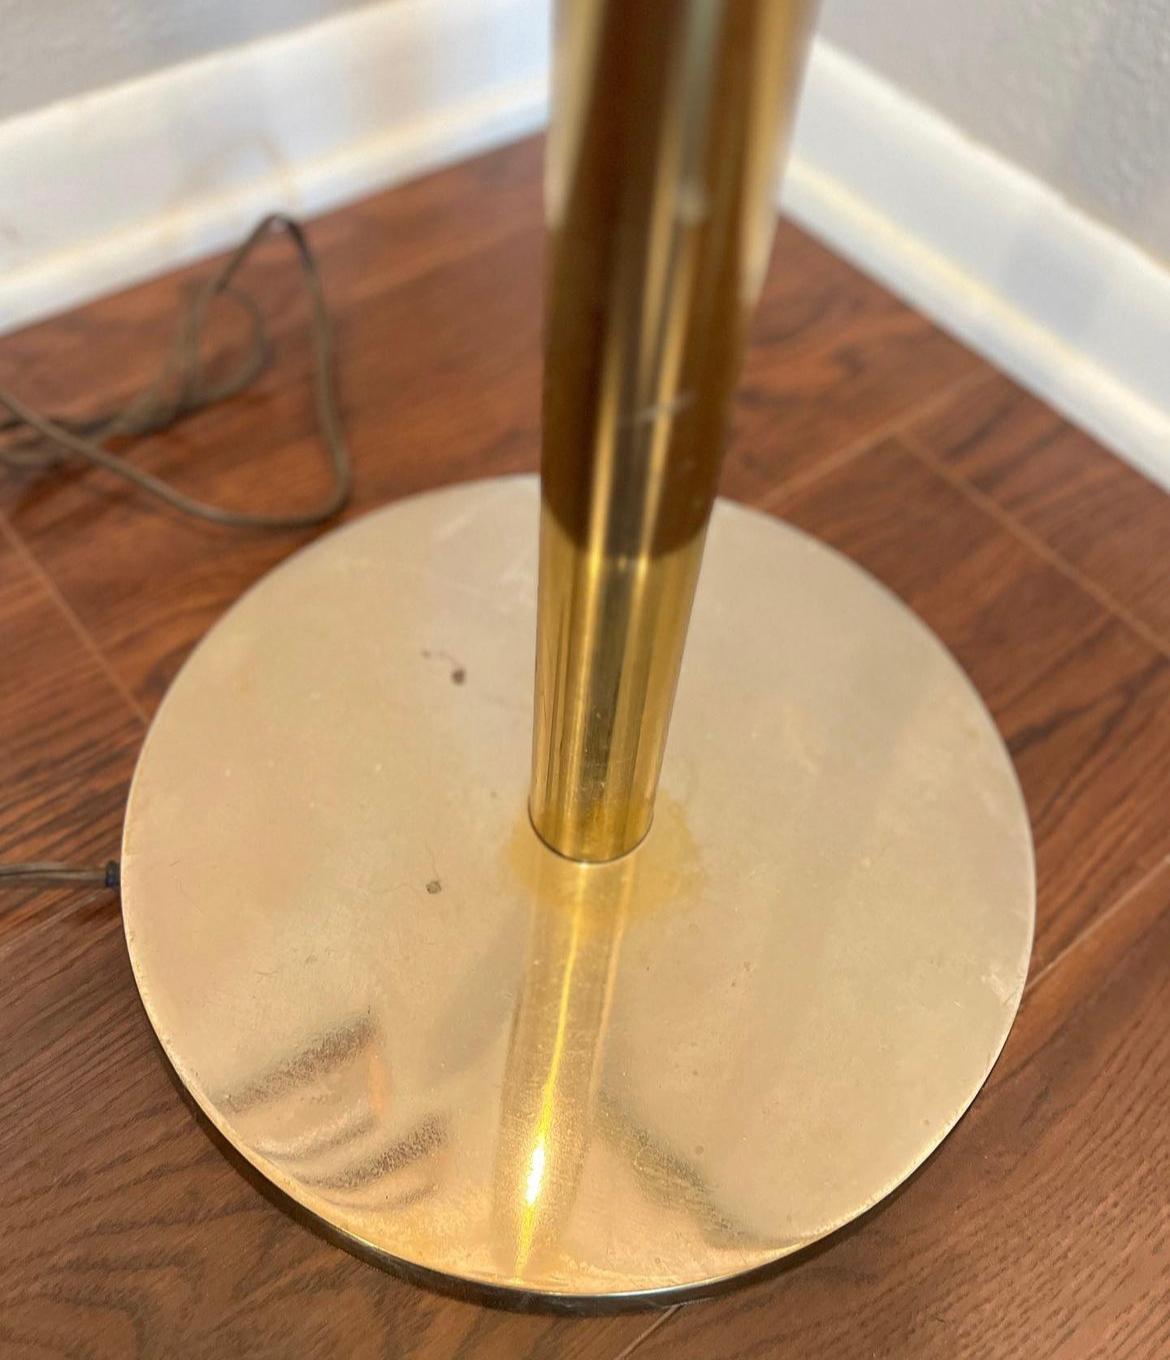 Vintage mid century brass torchiere tall floor lamp by Laurel Lamp Company. Features a minimalist tall design with a fluted trumpet opening. Beautiful scale and proportions. In vintage working condition with light scratches and brass has faded